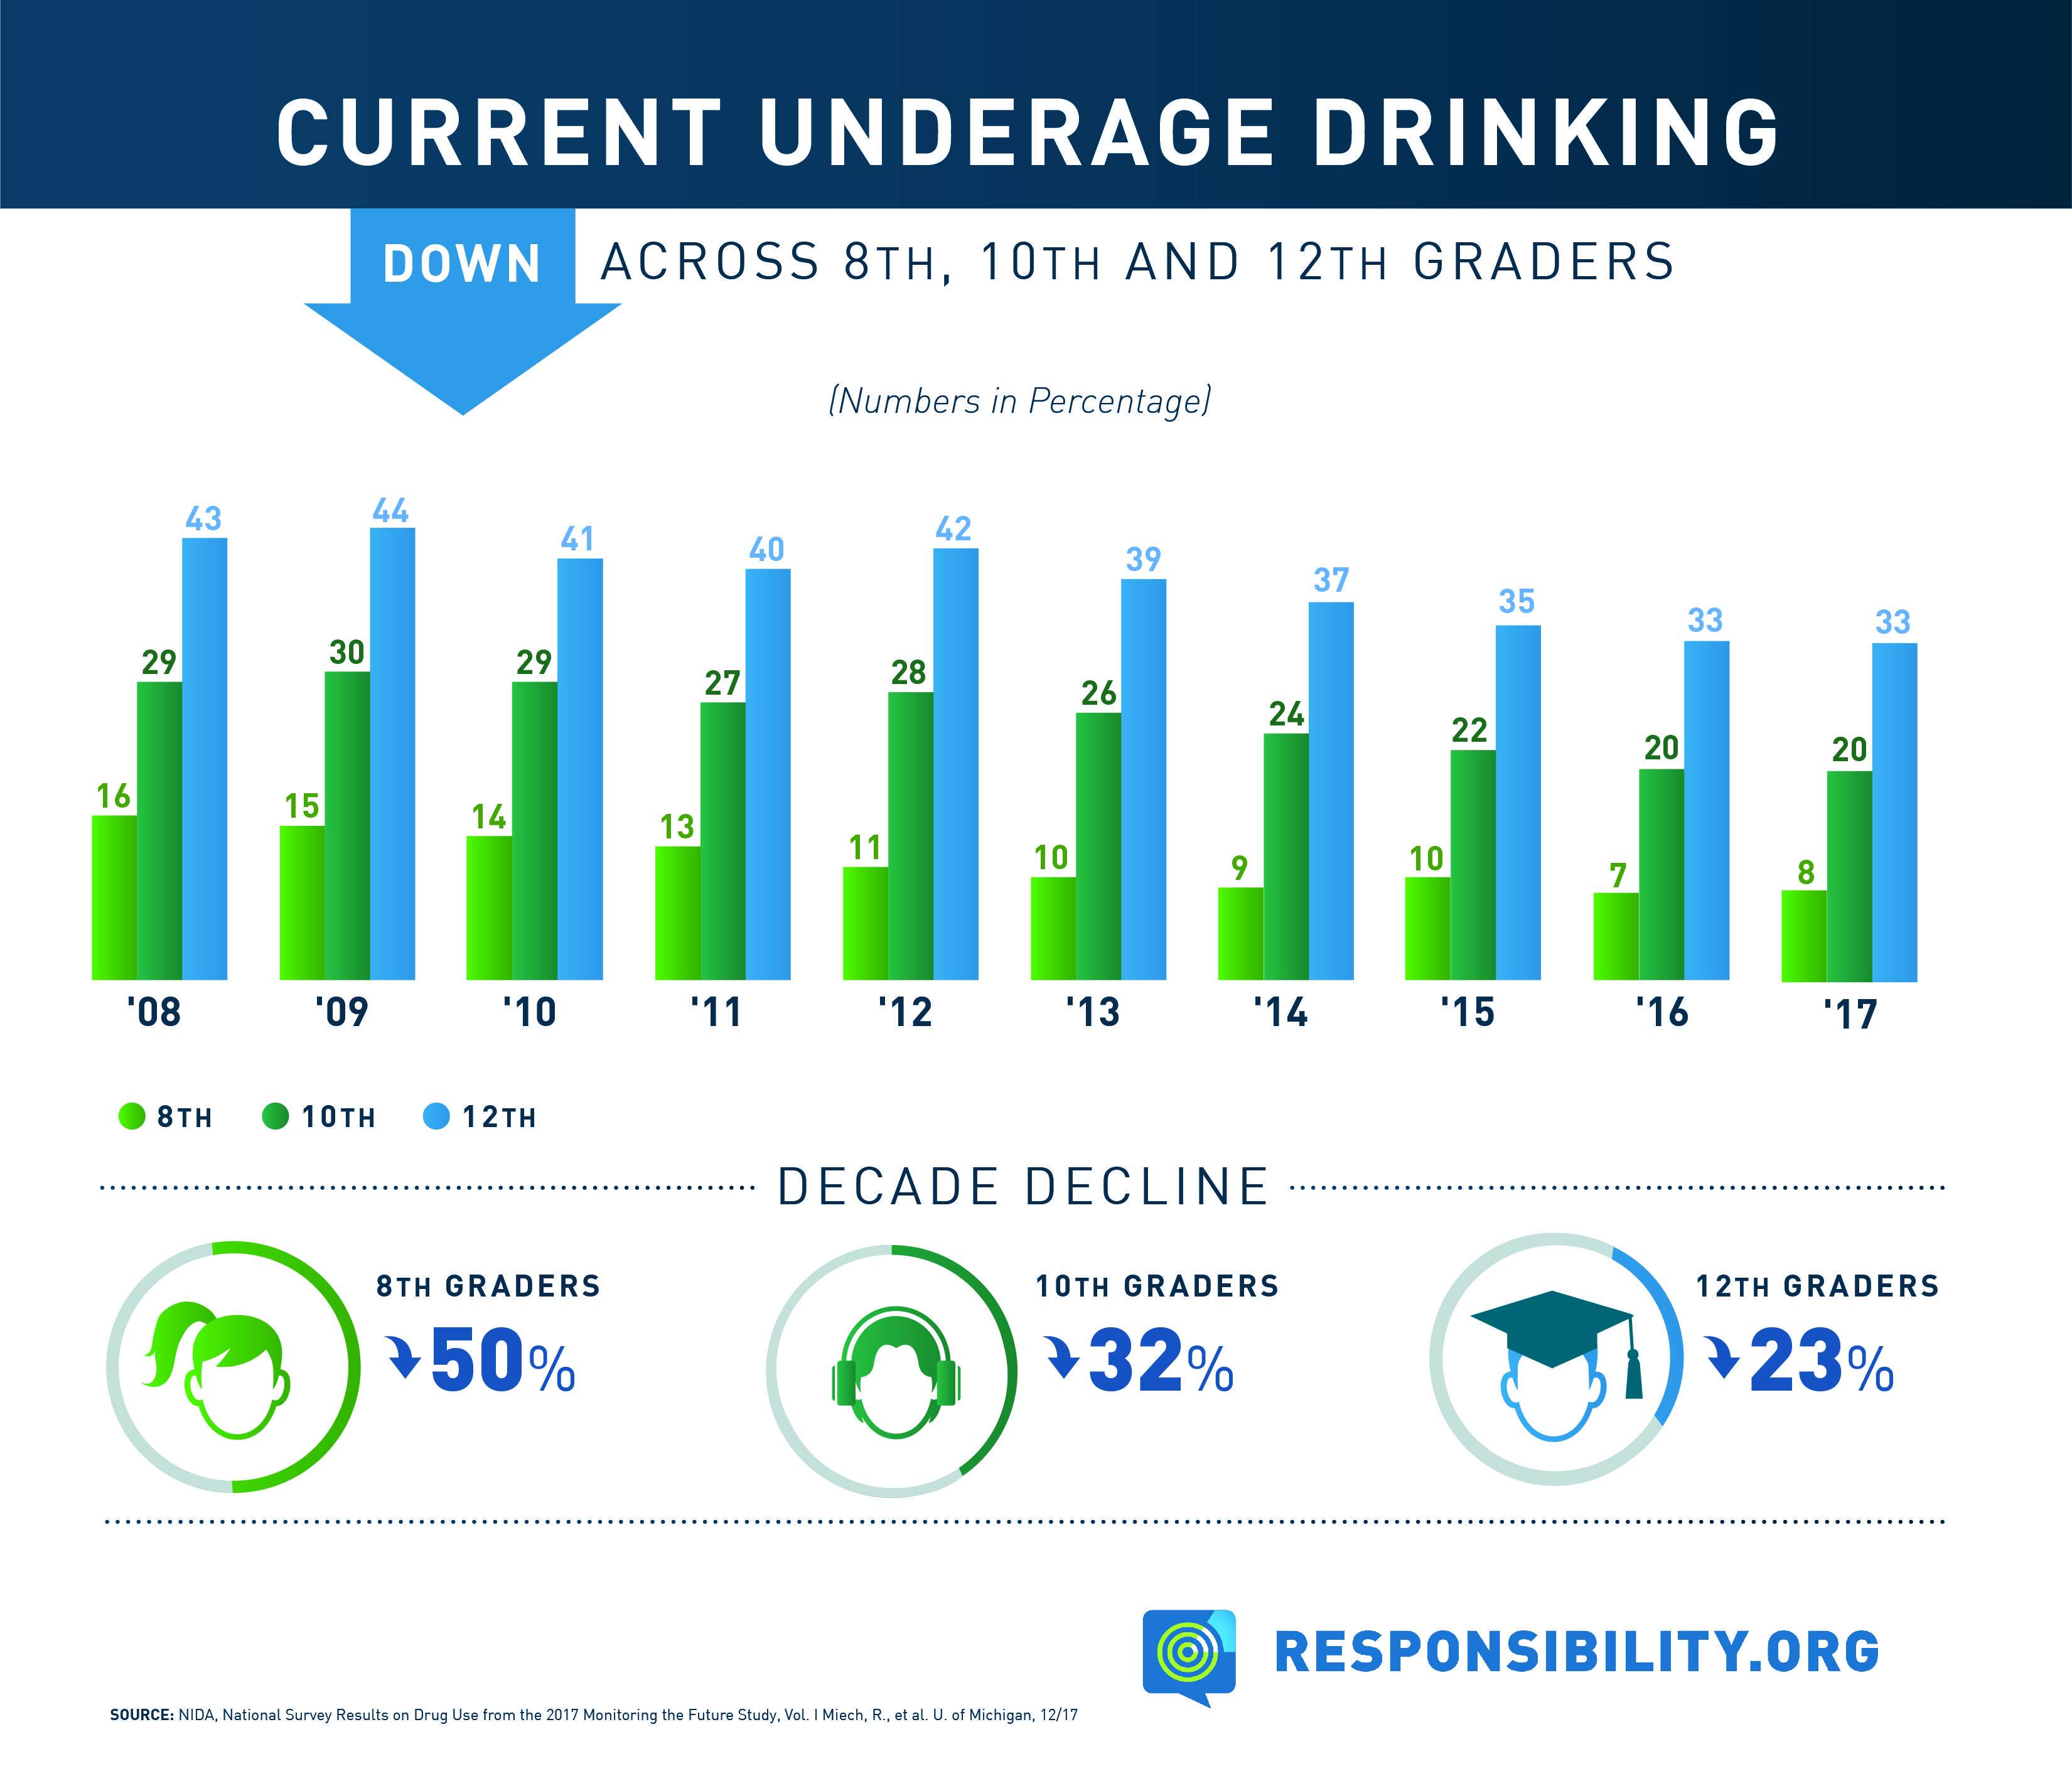 current underage drinking down 50% since 1991, but relatively